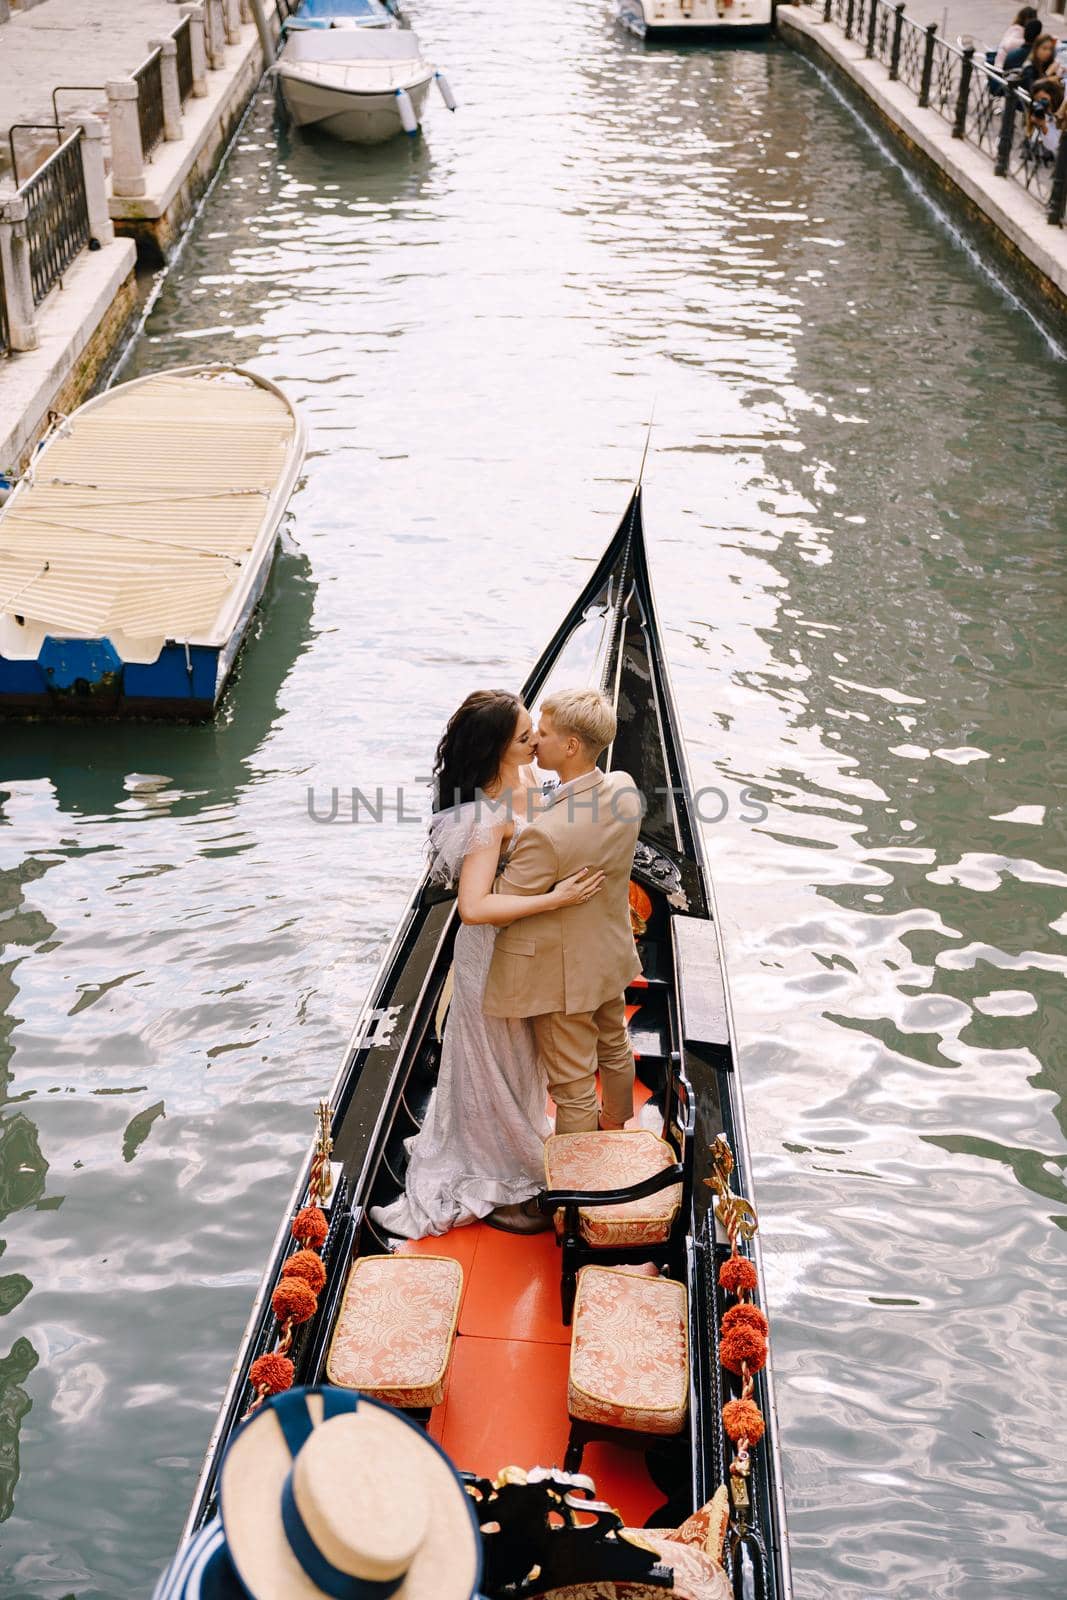 The gondolier rides the bride and groom in a classic wooden gondola along a narrow Venetian canal. The newlyweds stand in the boat, the view from behind.